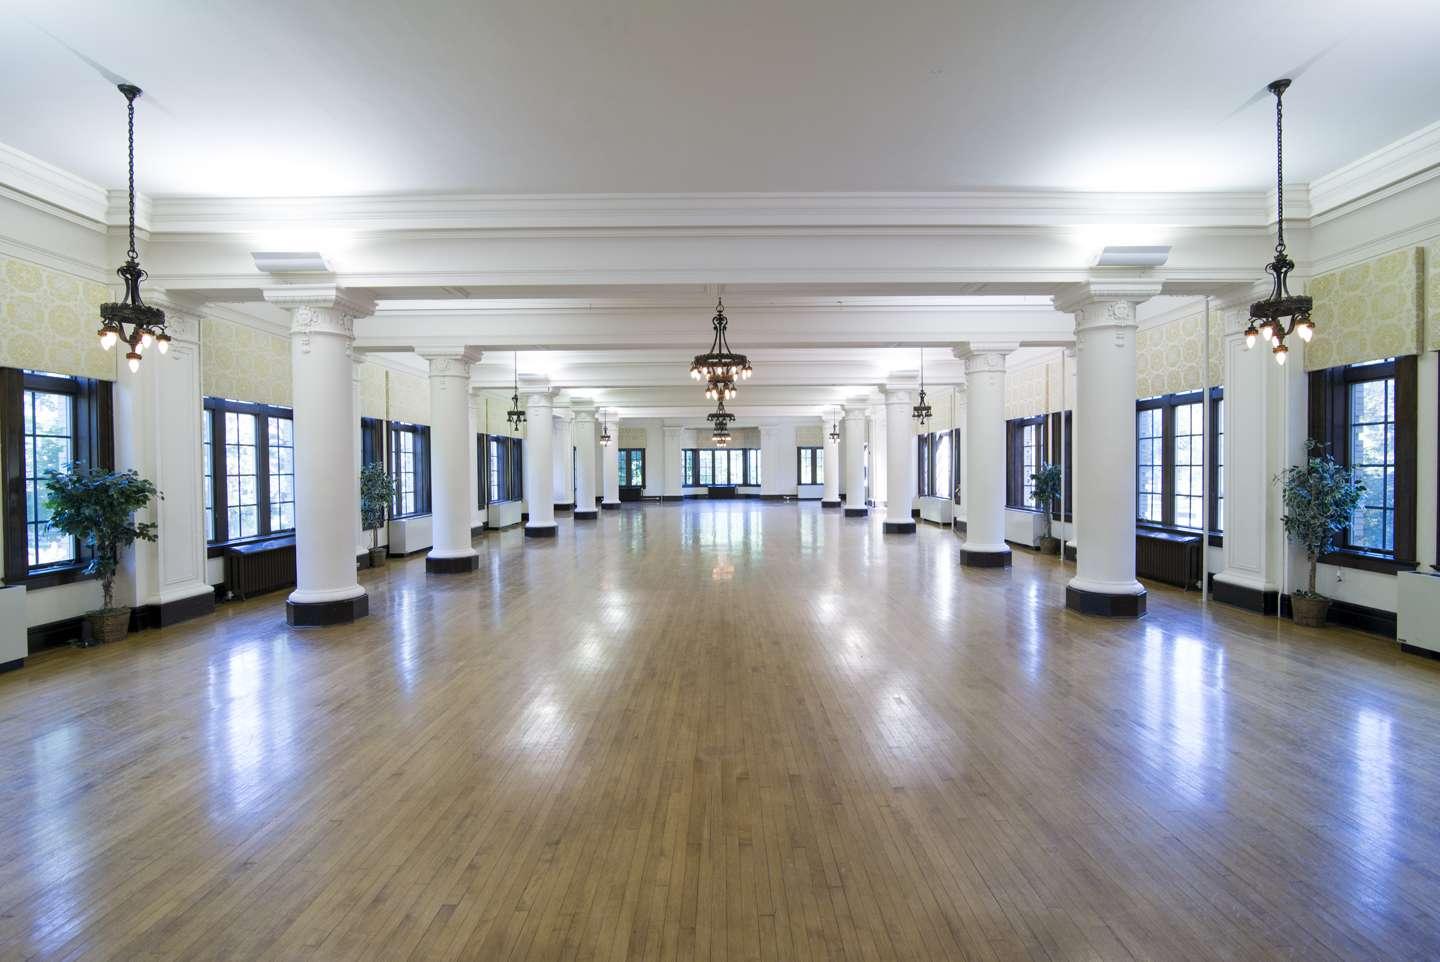 The beautiful, large Le Fer Hall Ballroom with the chandeliers, columns and wood floors.